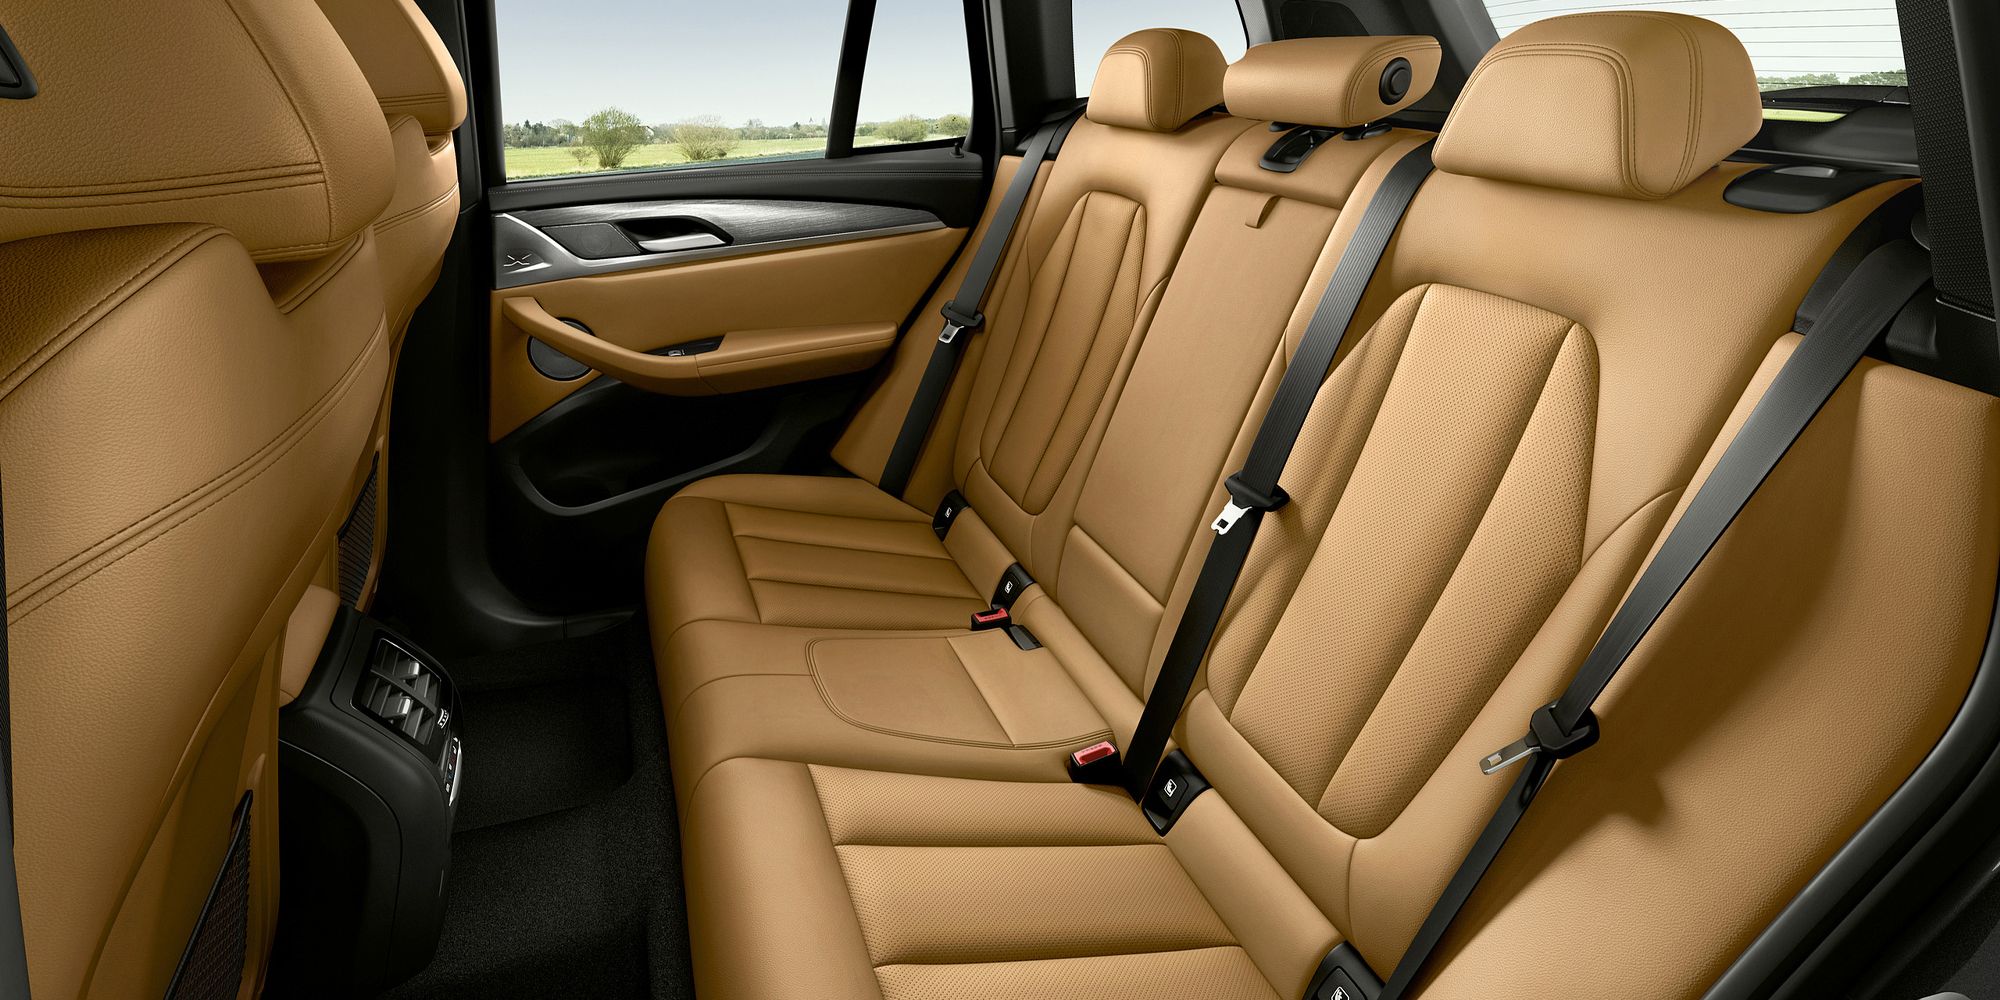 The rear seats in the new X3